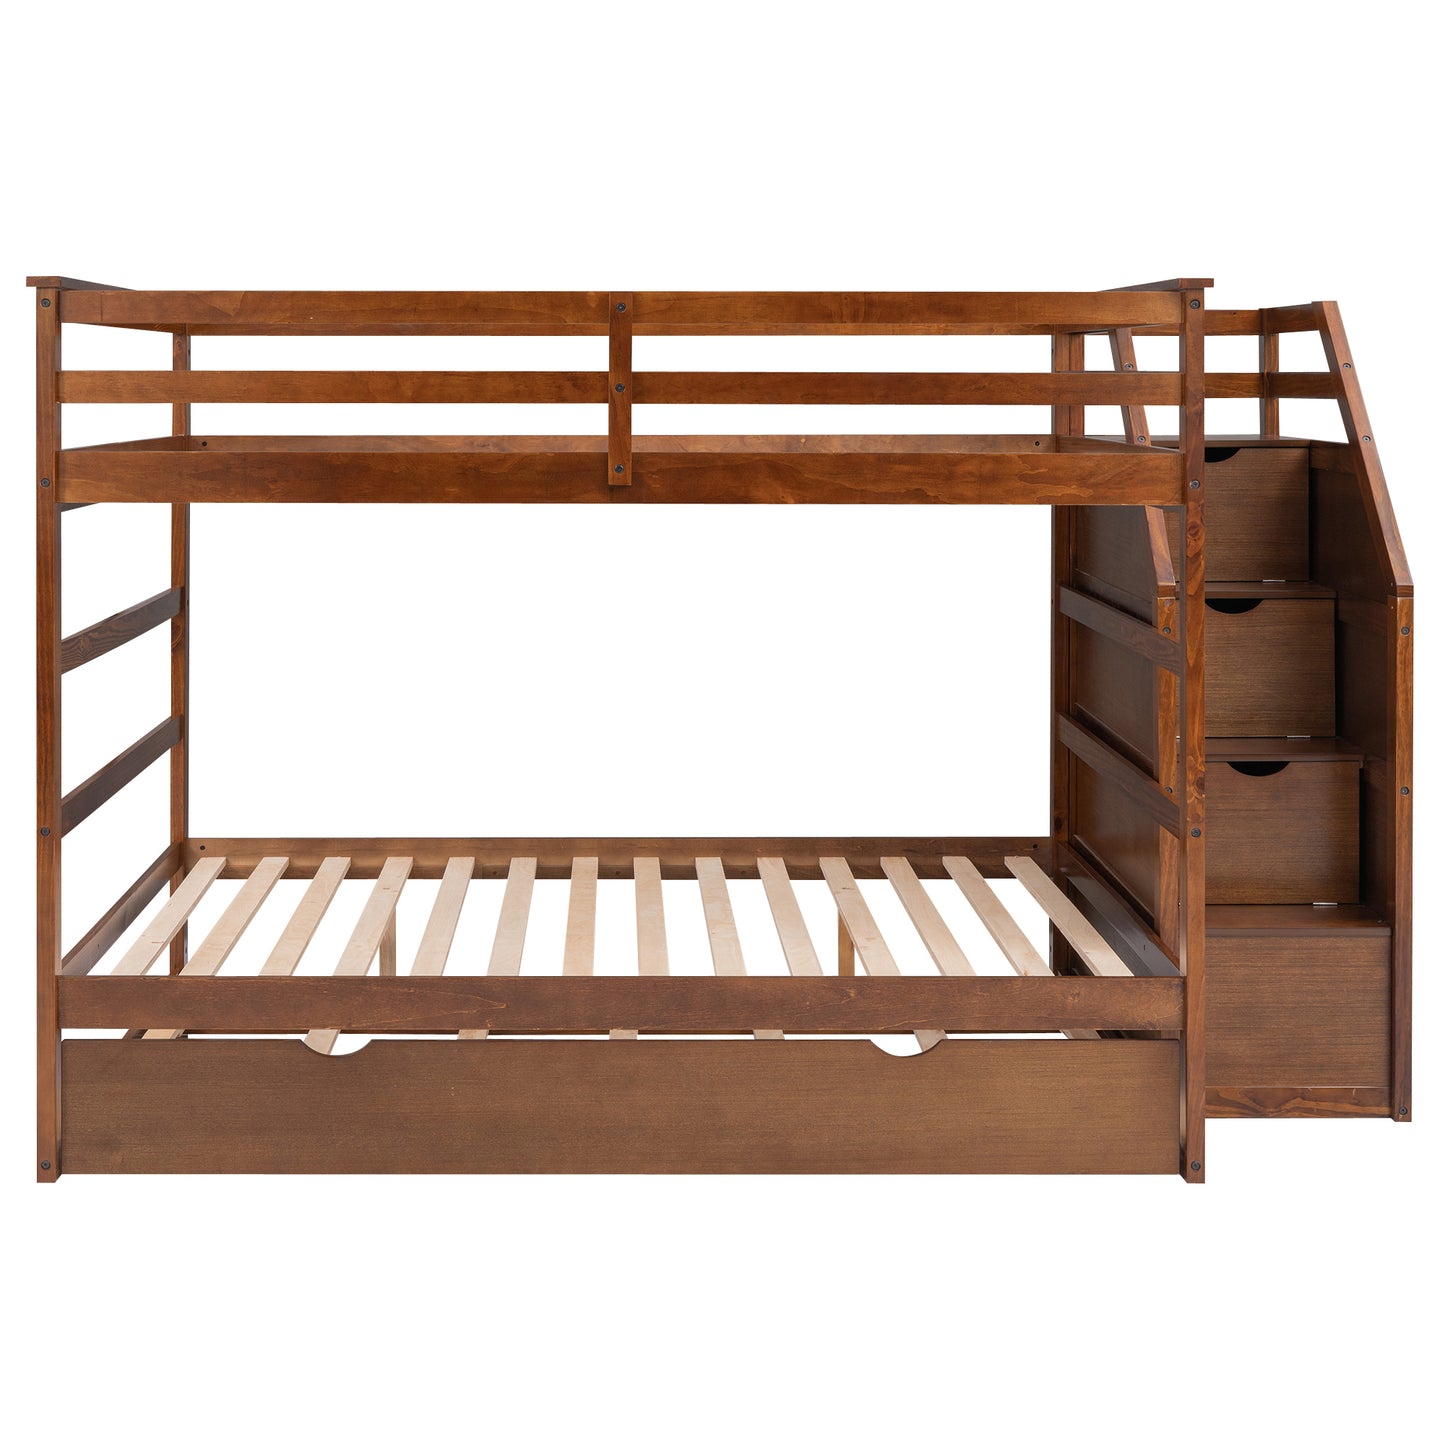 Elegant Full-Over-Full Bunk Bed with Trundle, Storage Stairs, and Walnut Finish